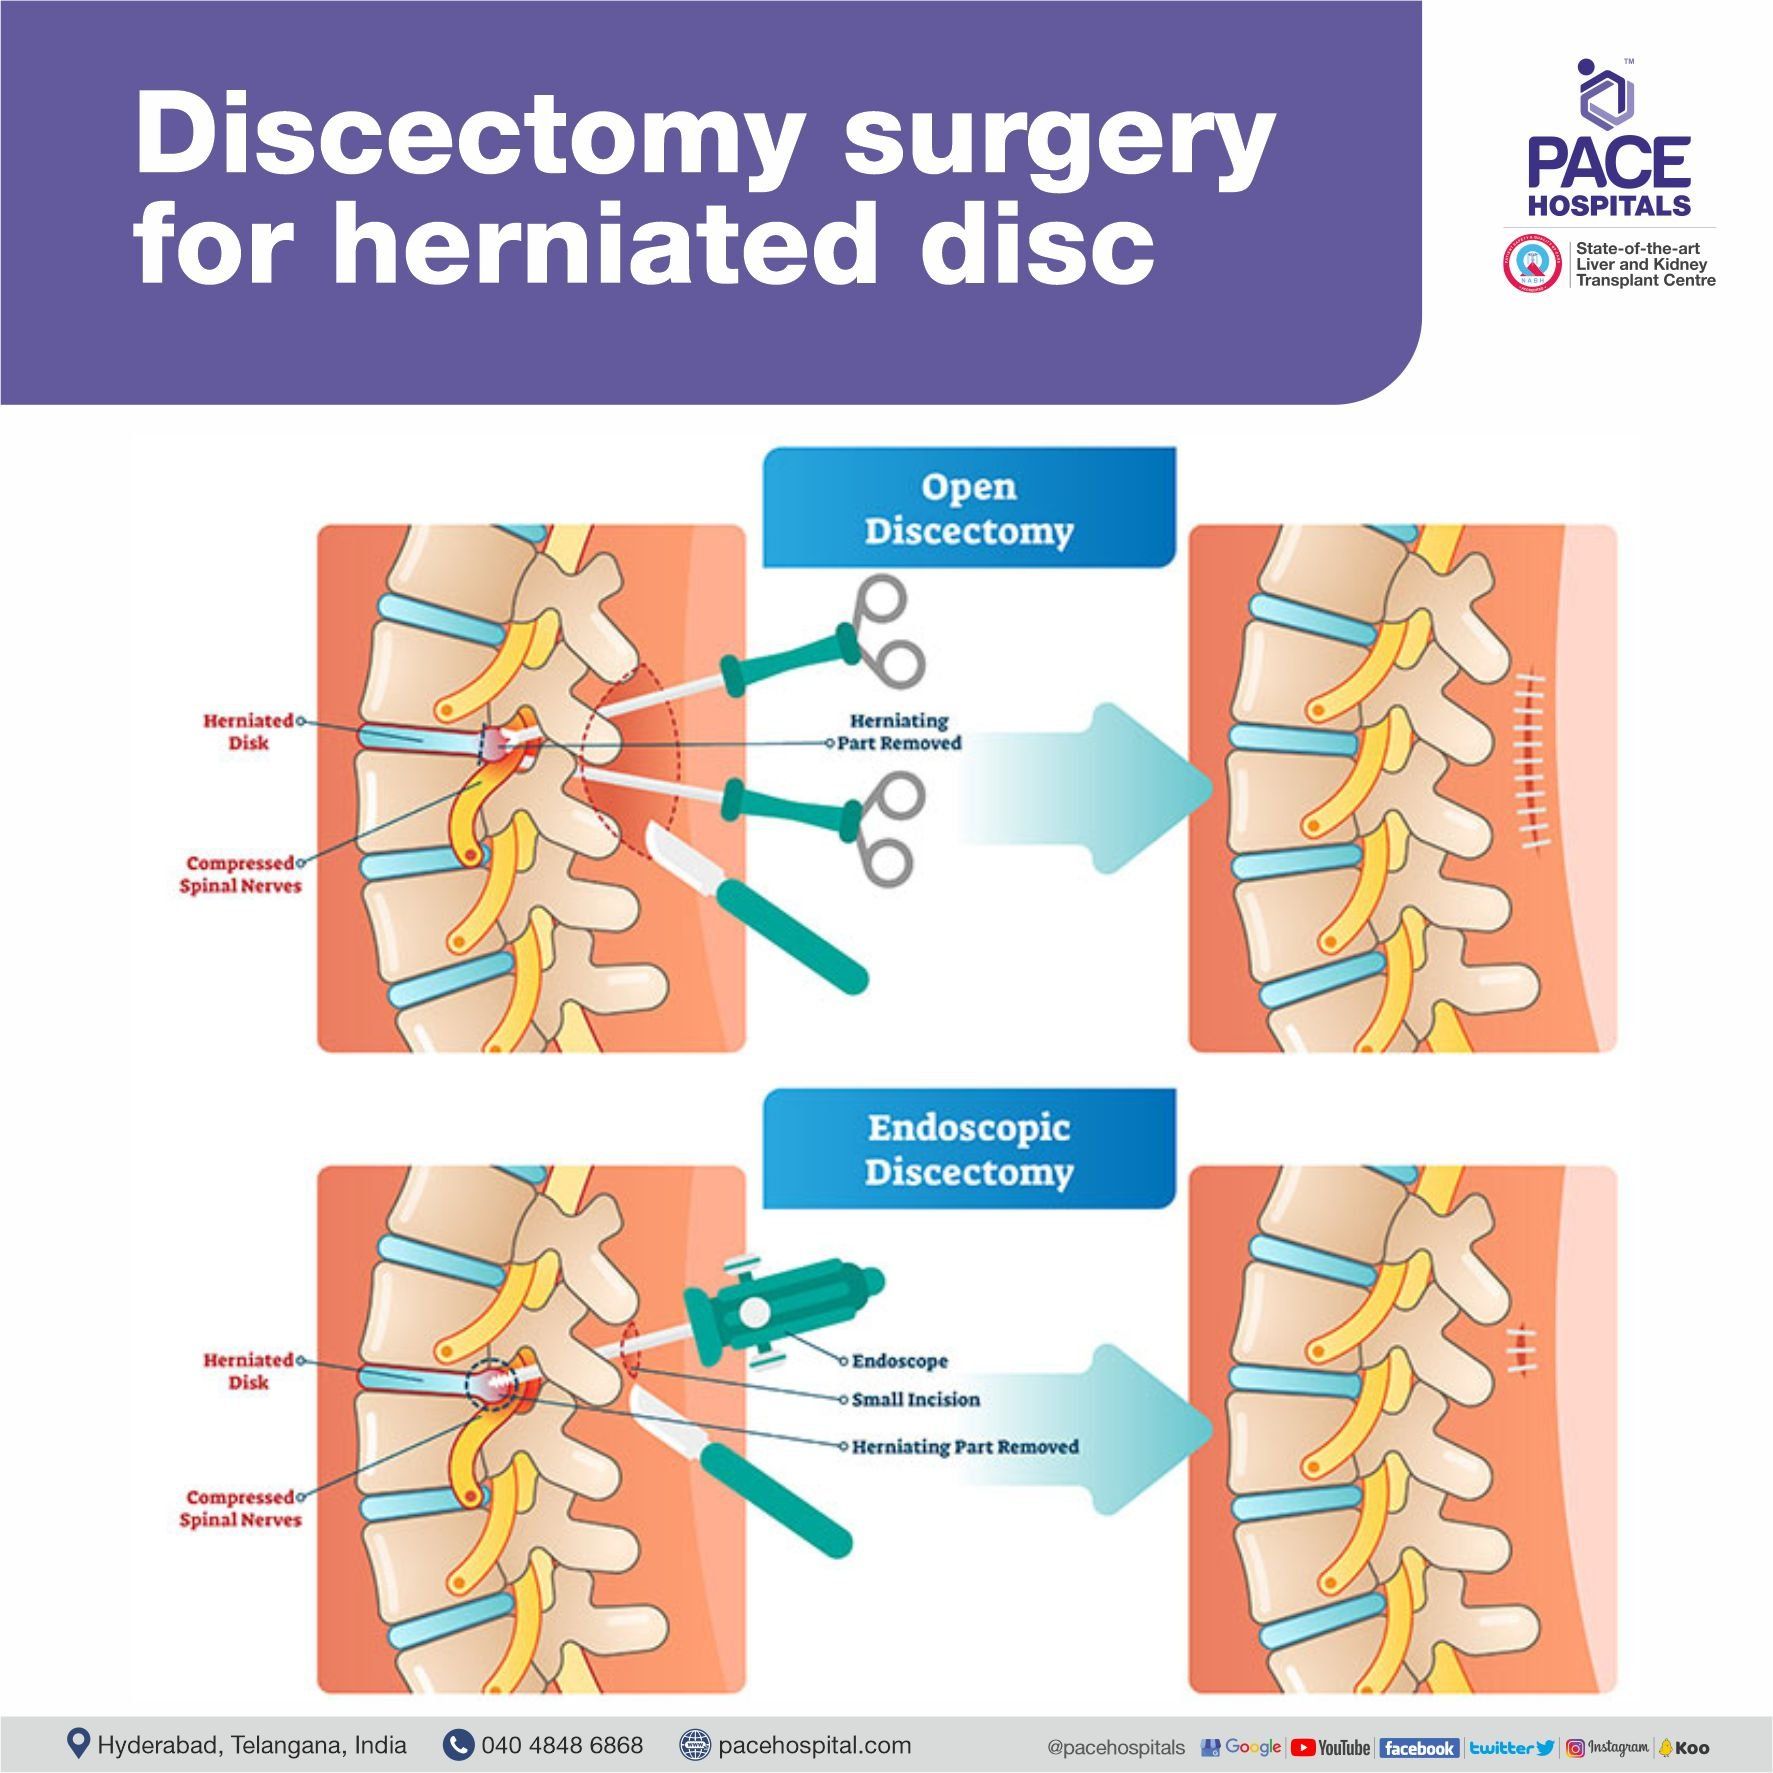 Discectomy surgery for herniated disc in Hyderabad, Telangana, India